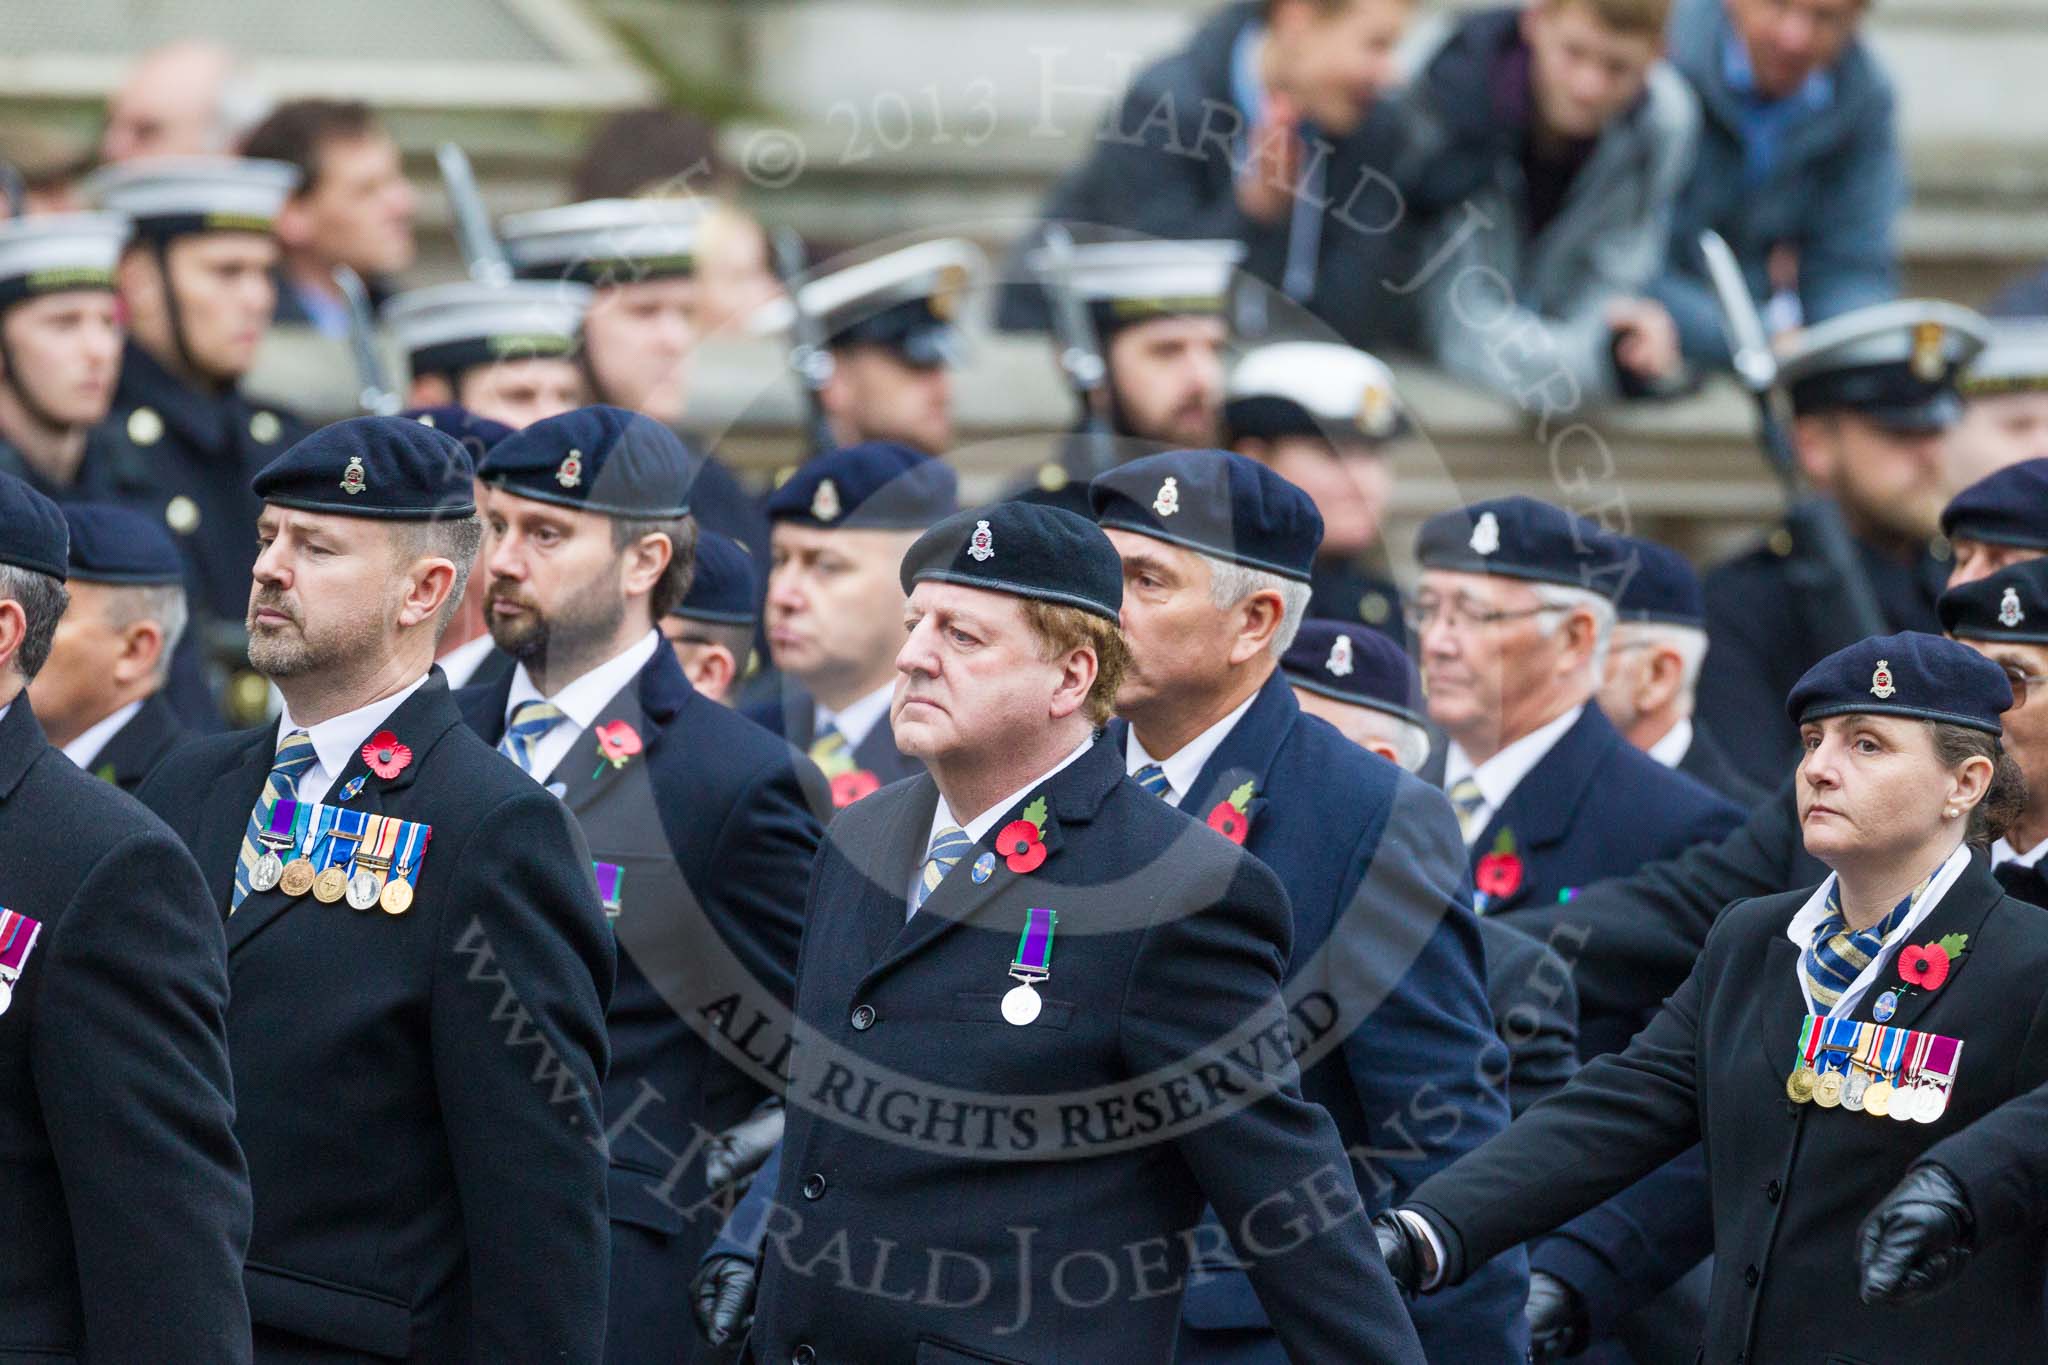 Remembrance Sunday at the Cenotaph 2015: Group B3, 3rd Regiment Royal Horse Artillery Association.
Cenotaph, Whitehall, London SW1,
London,
Greater London,
United Kingdom,
on 08 November 2015 at 11:36, image #29